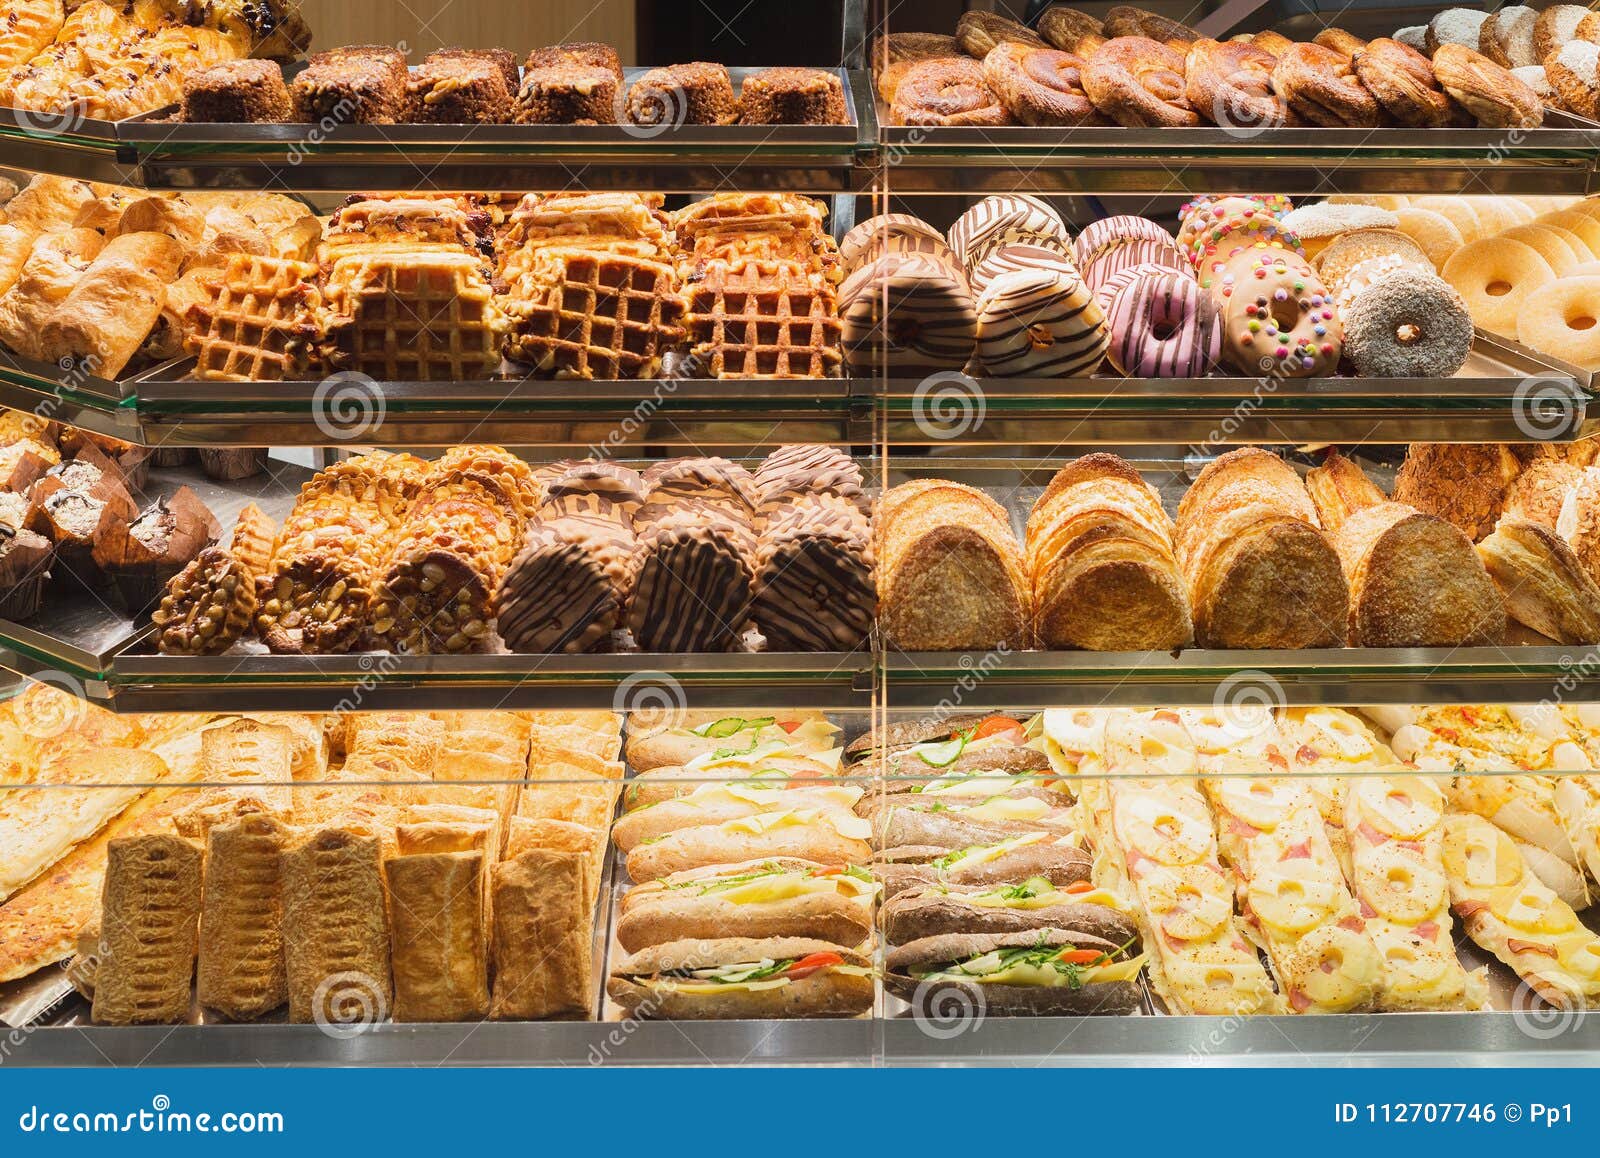 bakery bread pastry sweets display window